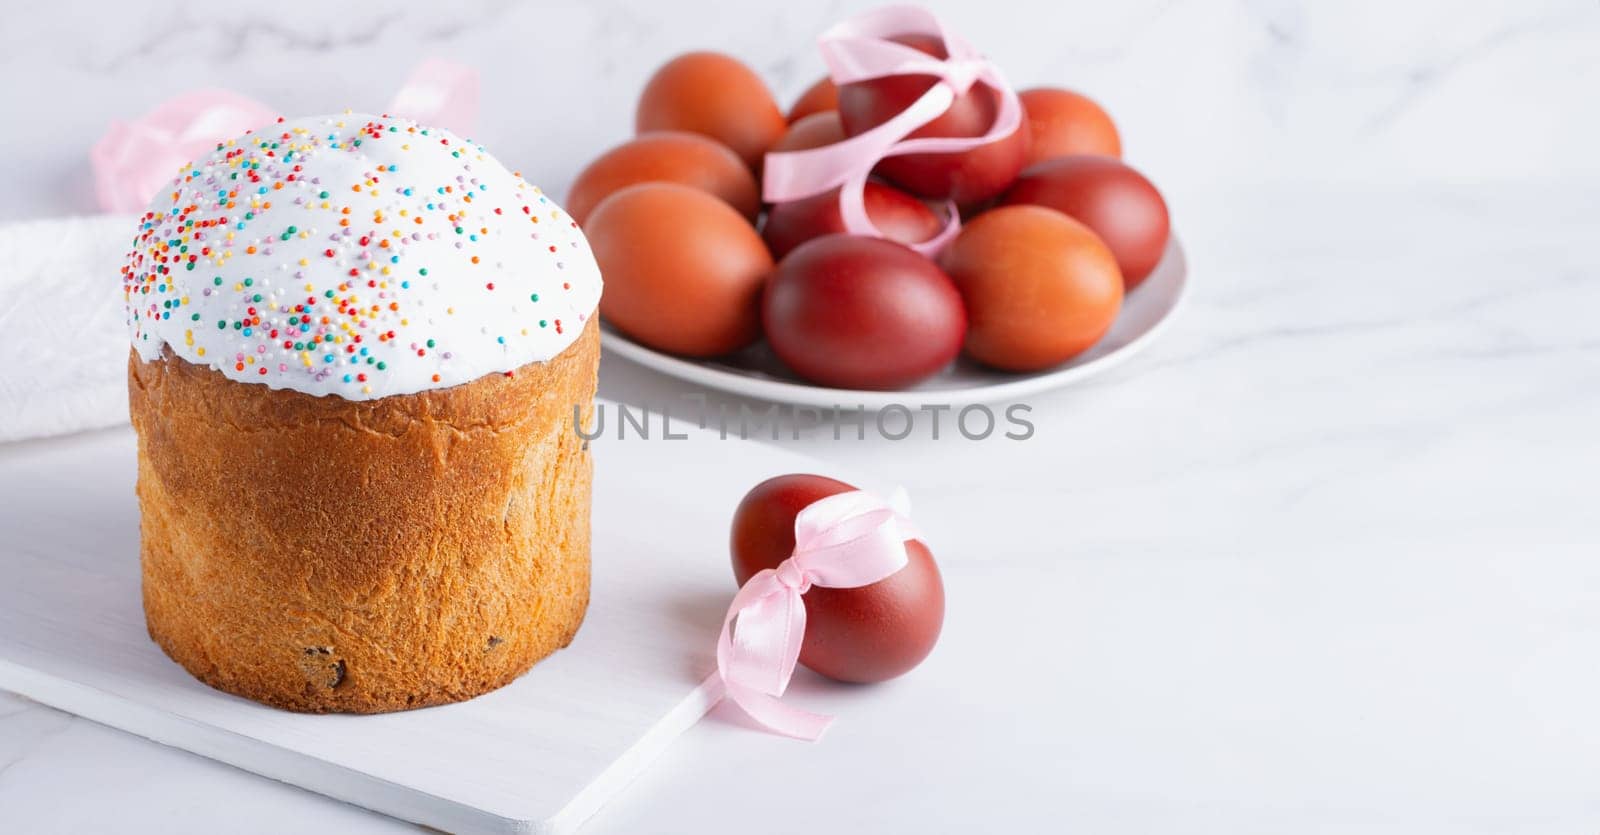 Delicious Easter cakes and eggs on light background, with copy space for text.